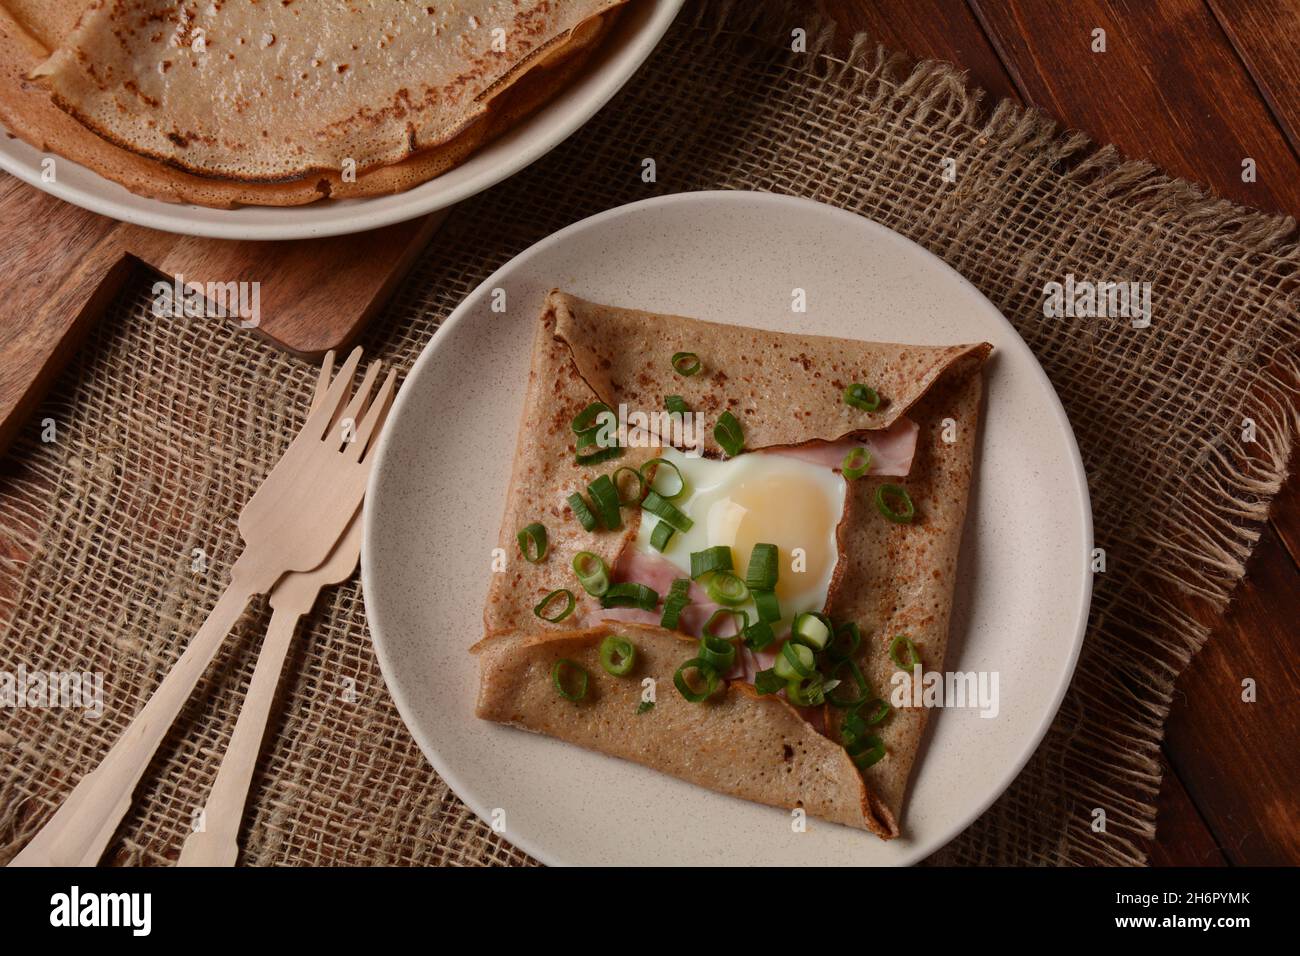 Breton galette, galette sarrasin, buckwheat crepe, with fried egg, cheese, ham. French Brittany cuisine. Stock Photo